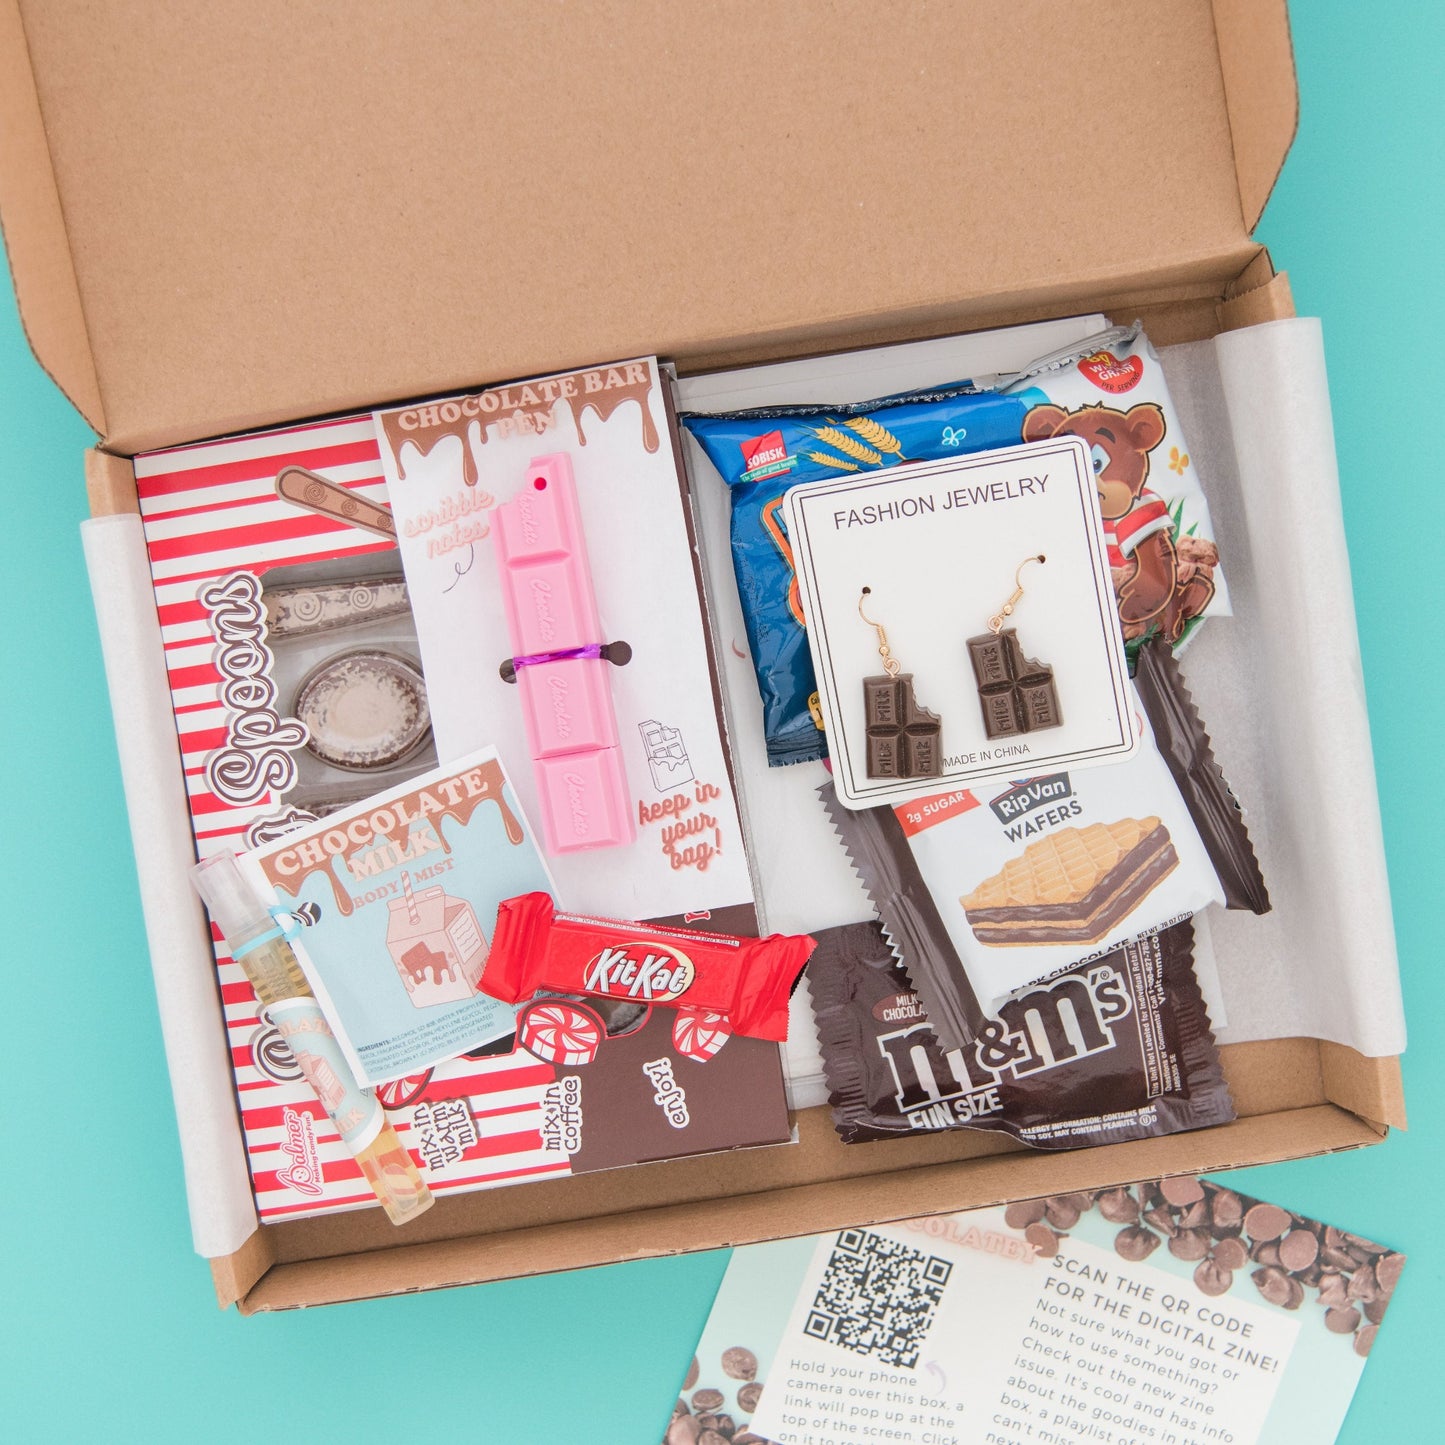 Indulge in our chocolate-themed subscription box! Includes a holiday greeting card, delicious snacks, chocolate spoons, and novelty earrings and pen.